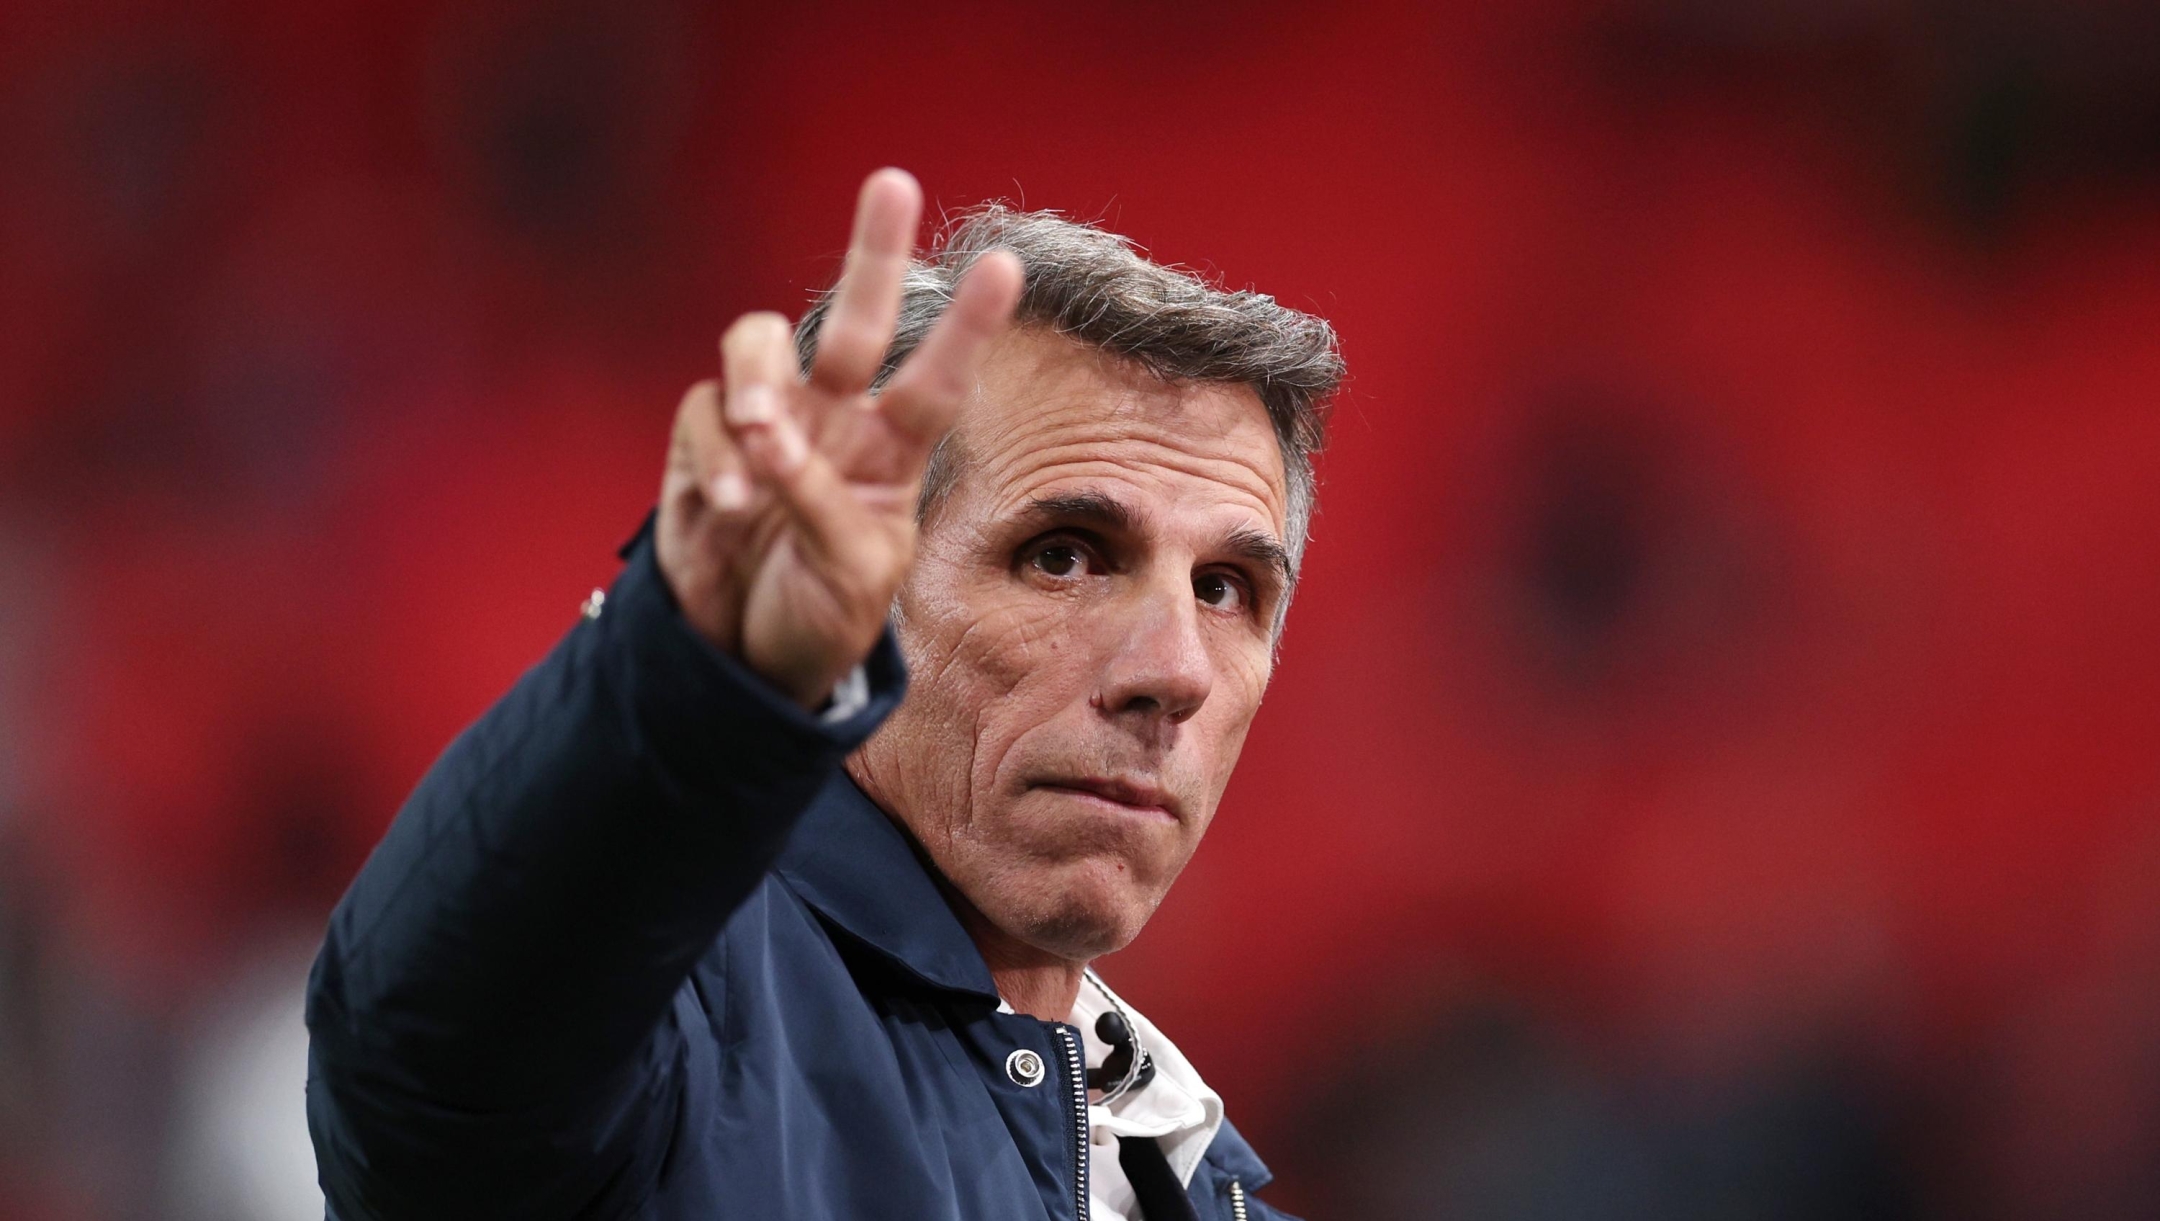 LONDON, ENGLAND - OCTOBER 17: Gianfranco Zola is seen prior to the UEFA EURO 2024 European qualifier match between England and Italy at Wembley Stadium on October 17, 2023 in London, England. (Photo by Richard Heathcote/Getty Images)